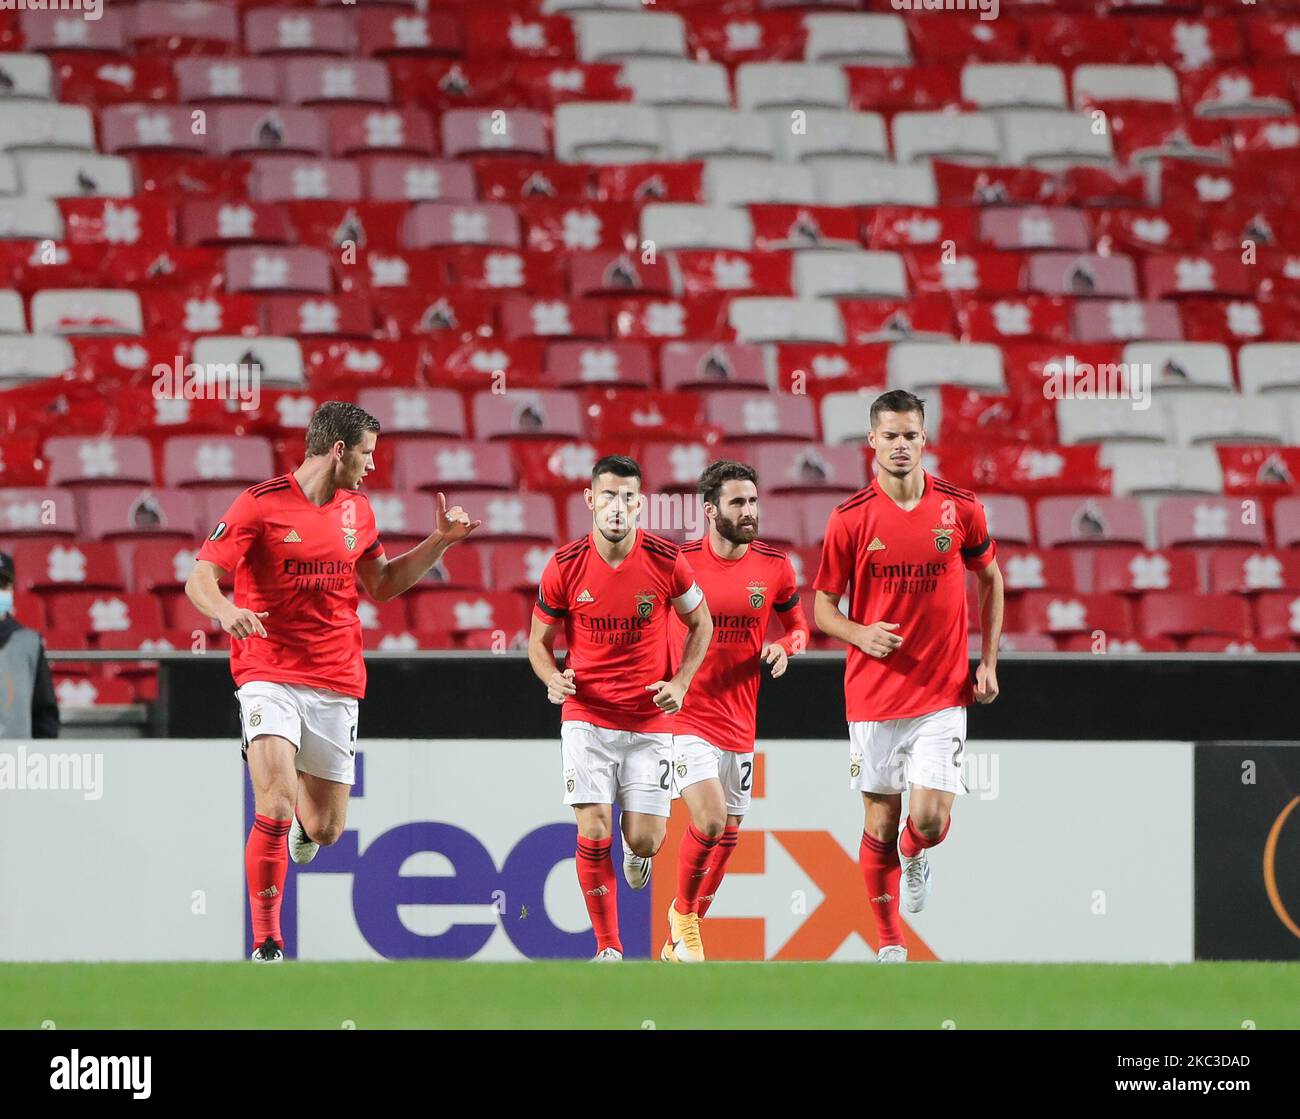 Pizzi of SL Benfica celebrates after scoring a goal during the UEFA Europa League Group D stage match between SL Benfica and Rangers FC at Estadio da Luz on November 5, 2020 in Lisbon, Portugal. (Photo by Paulo Nascimento/NurPhoto) Stock Photo